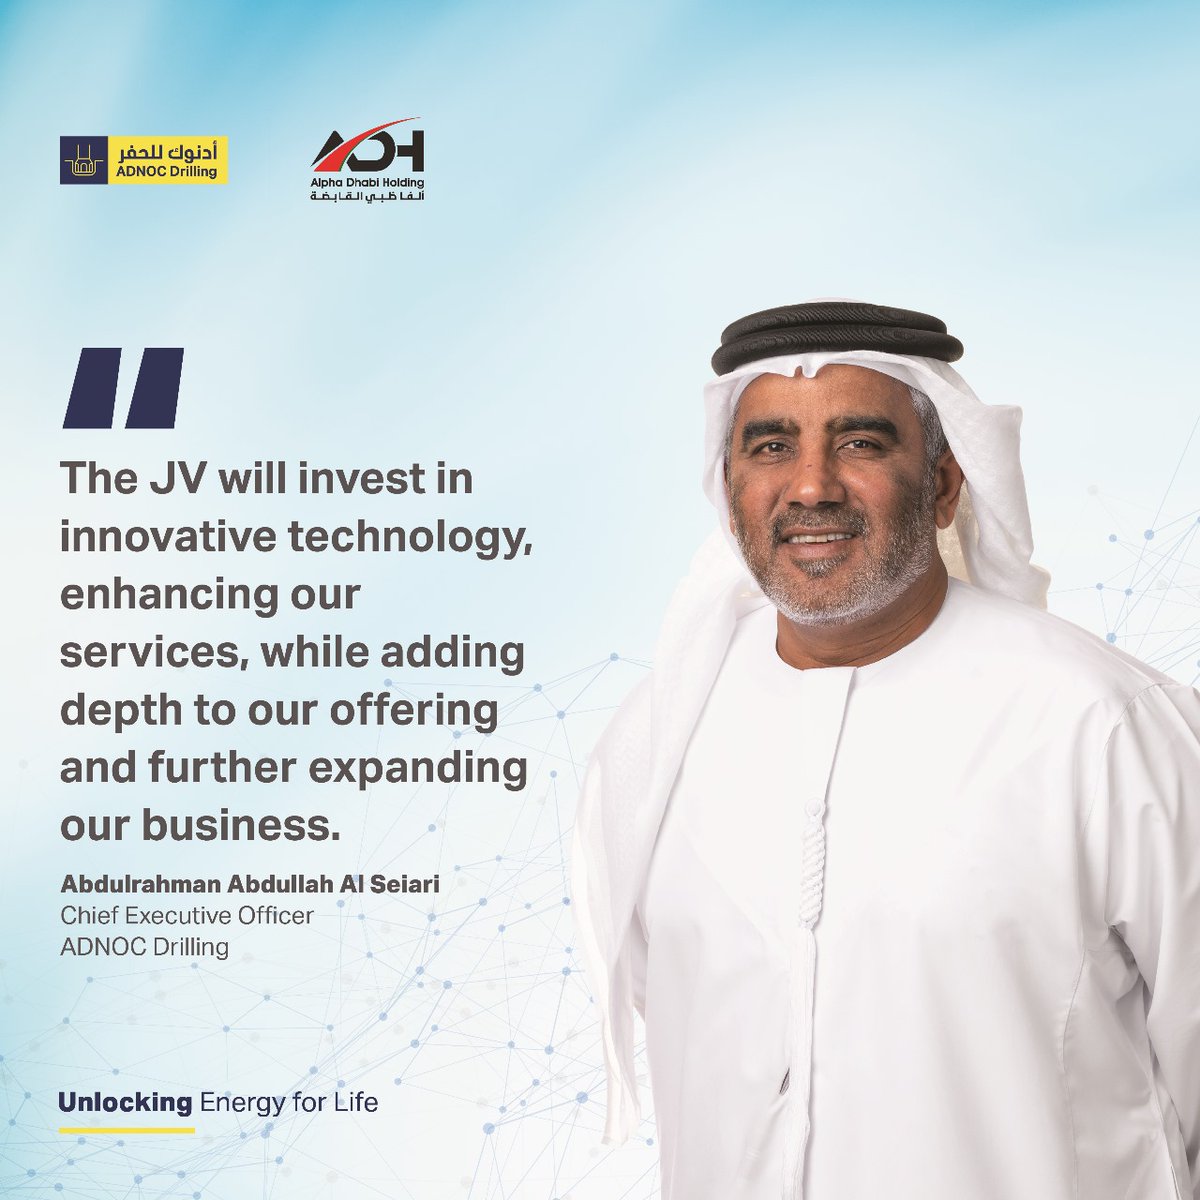 Through the recently announced strategic partnership with ADNOC Drilling, we continue to drive the integration of innovation and technology across our business.
 
#elevatingpotential #inabudhabi #adnocdrilling #alphadhabi #energy #jointventure